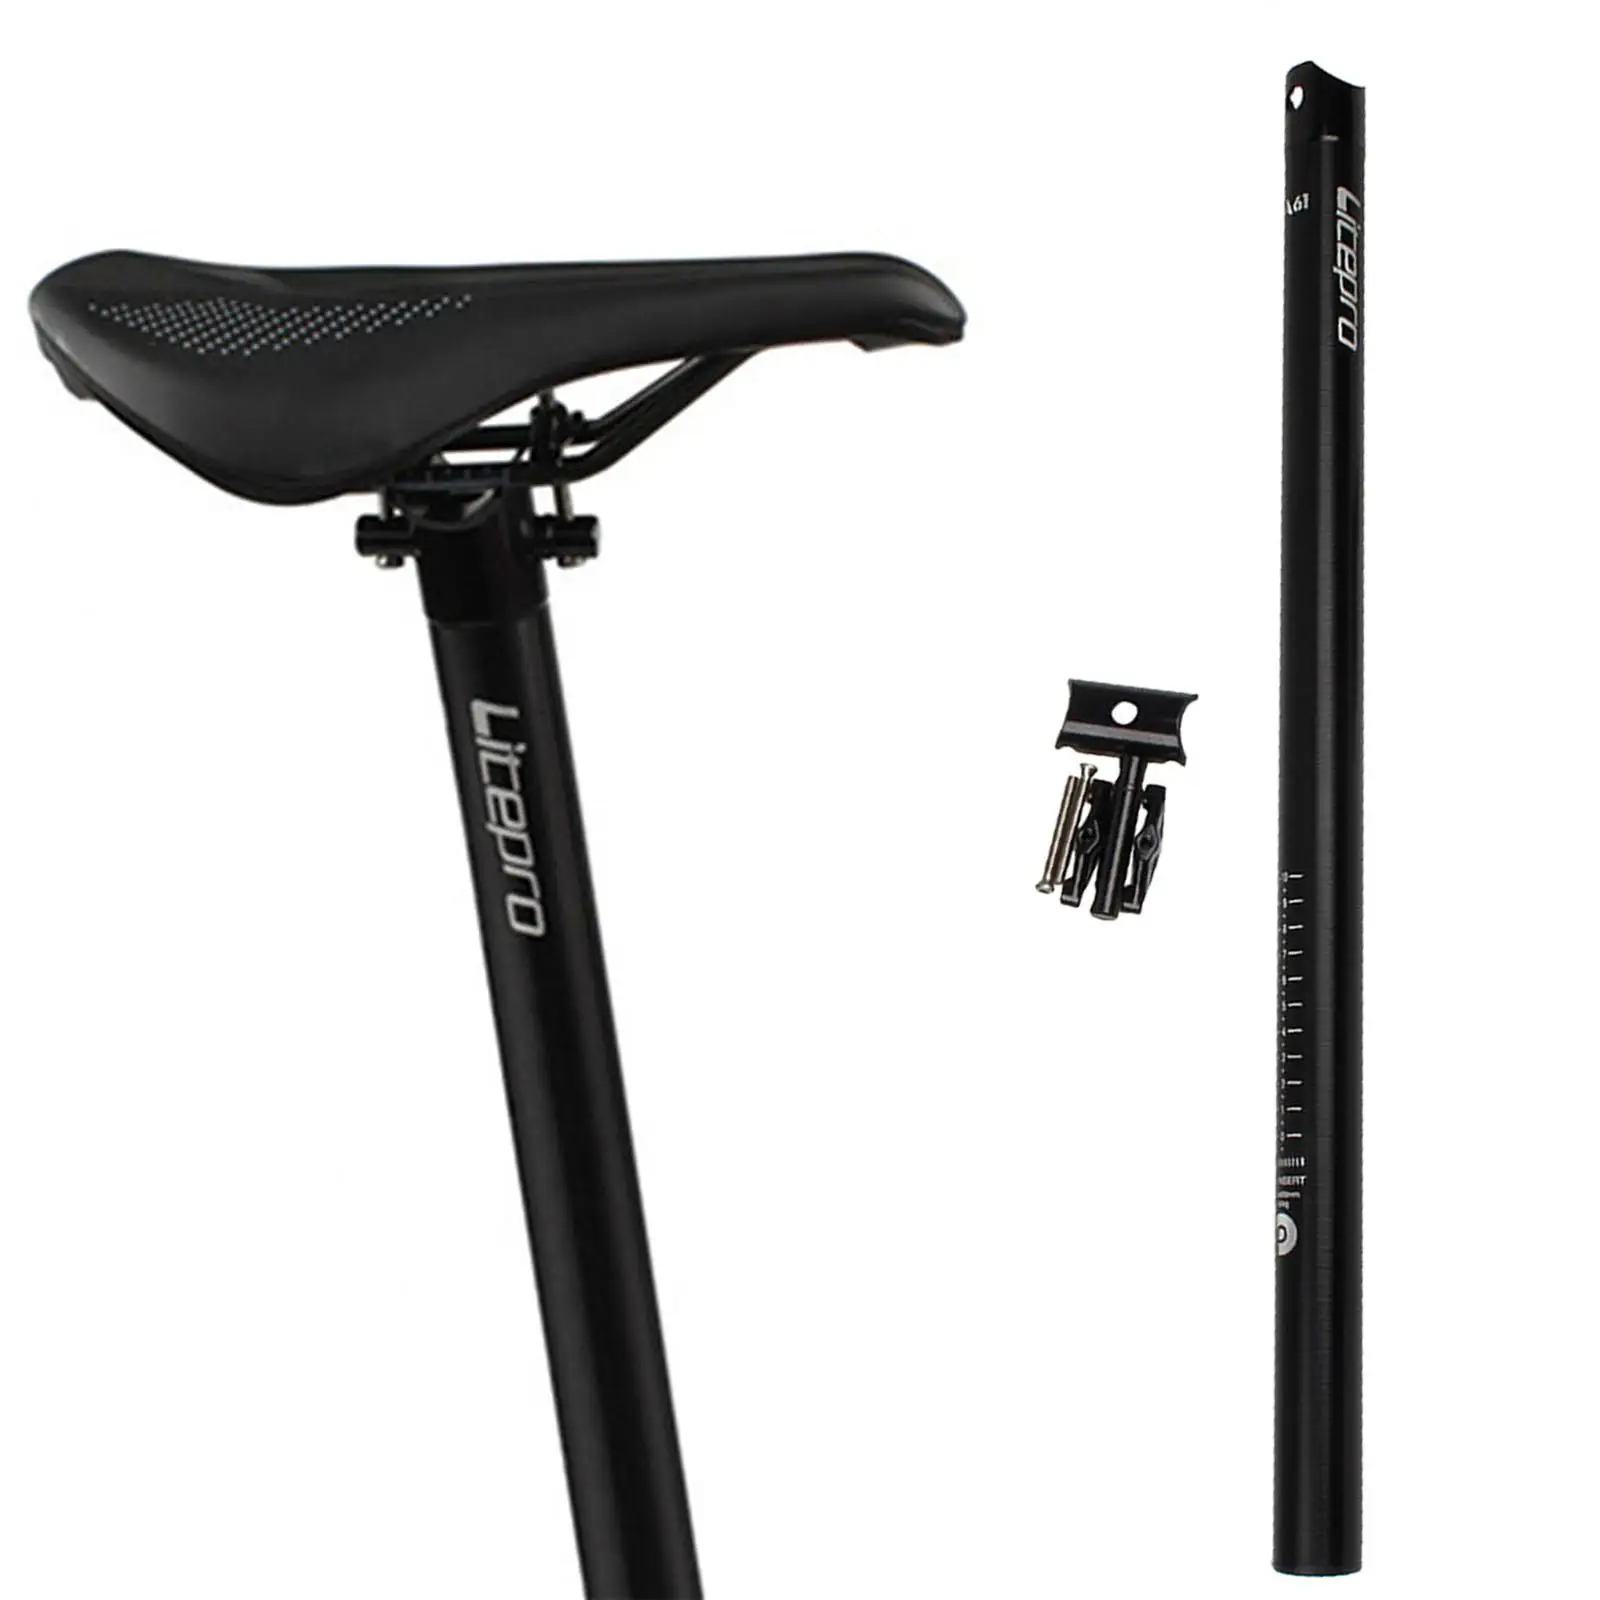 Folding Bike Aluminum Alloy Seat Post Super Light Seat Tube Rod Seatpost 31.8* for Cycling Accessories